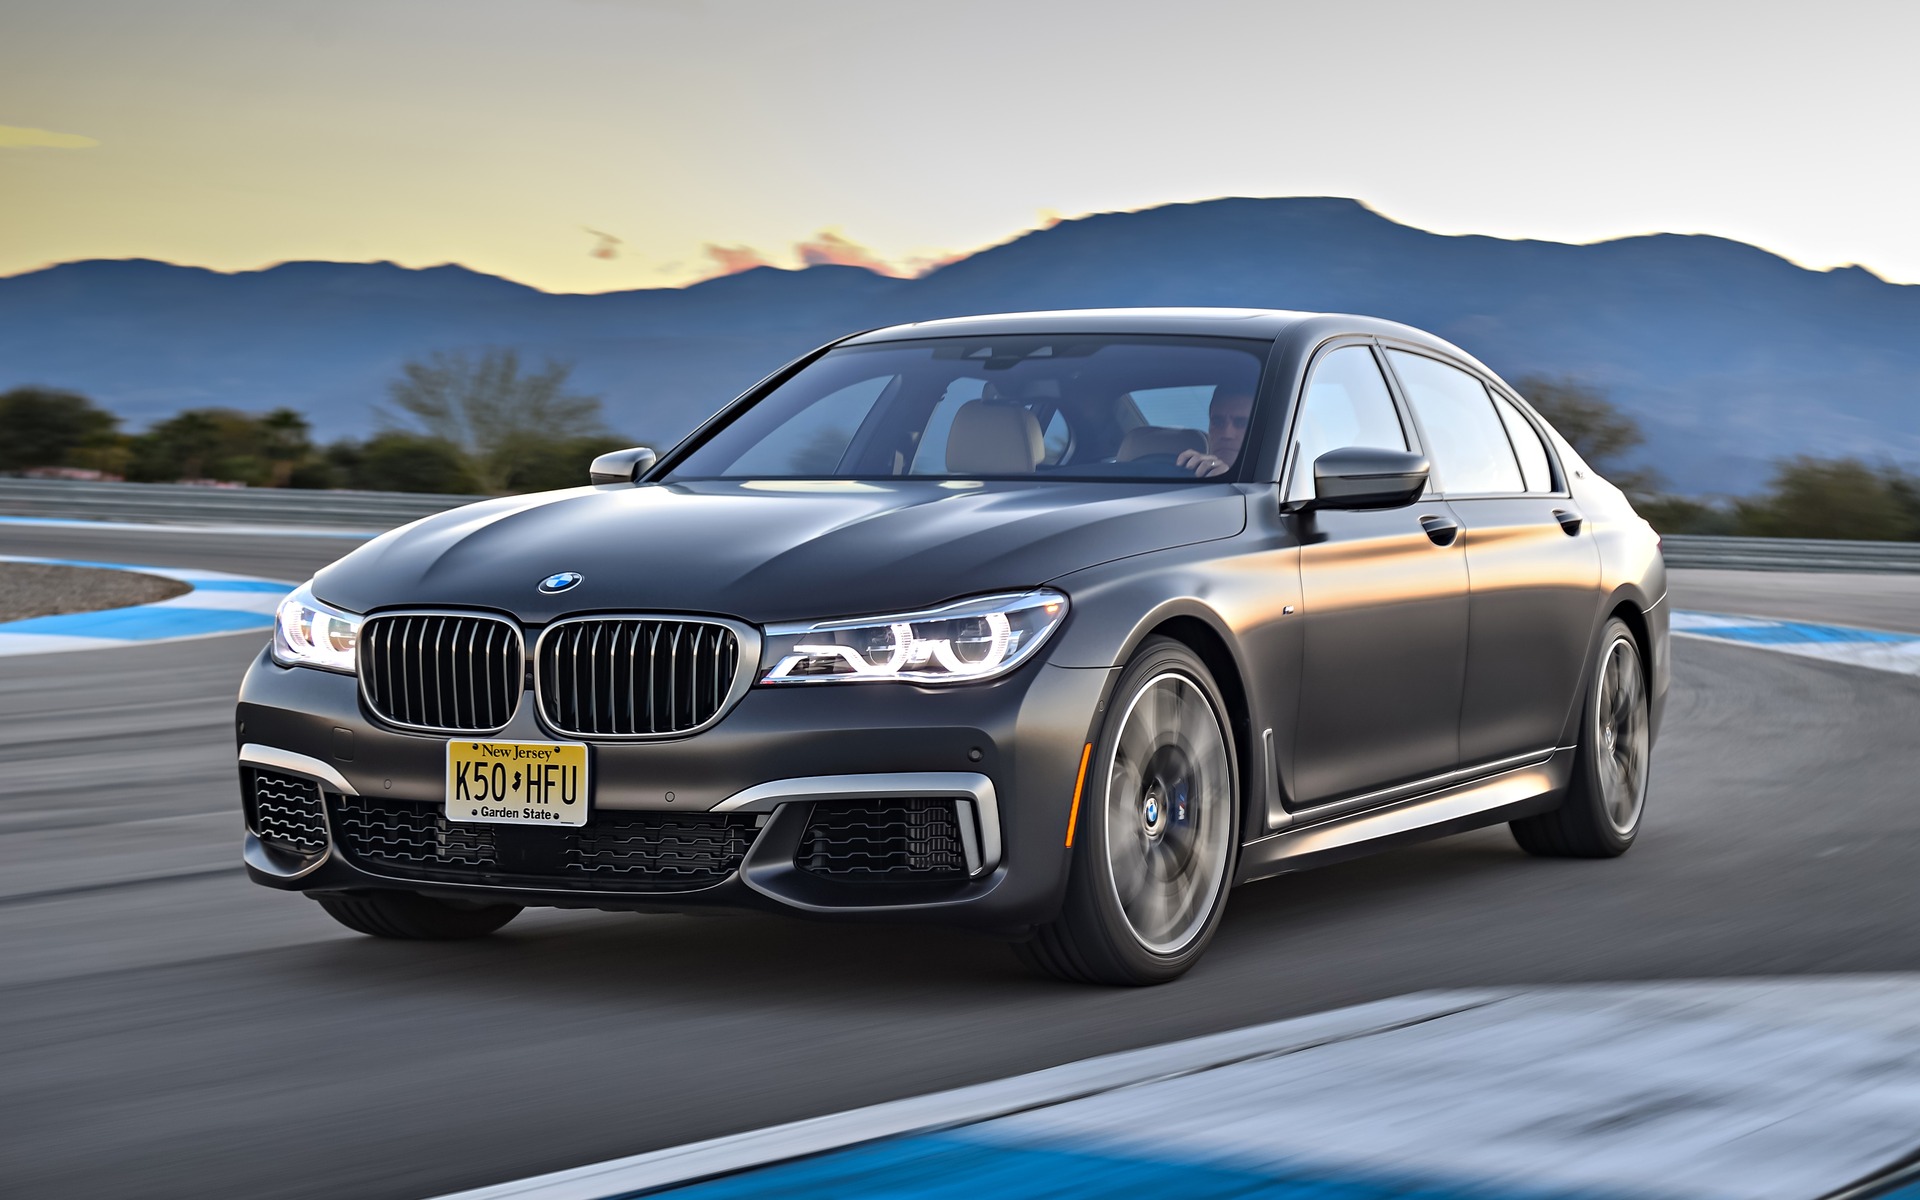 2018 Bmw 7 Series 750li Xdrive Specifications The Car Guide